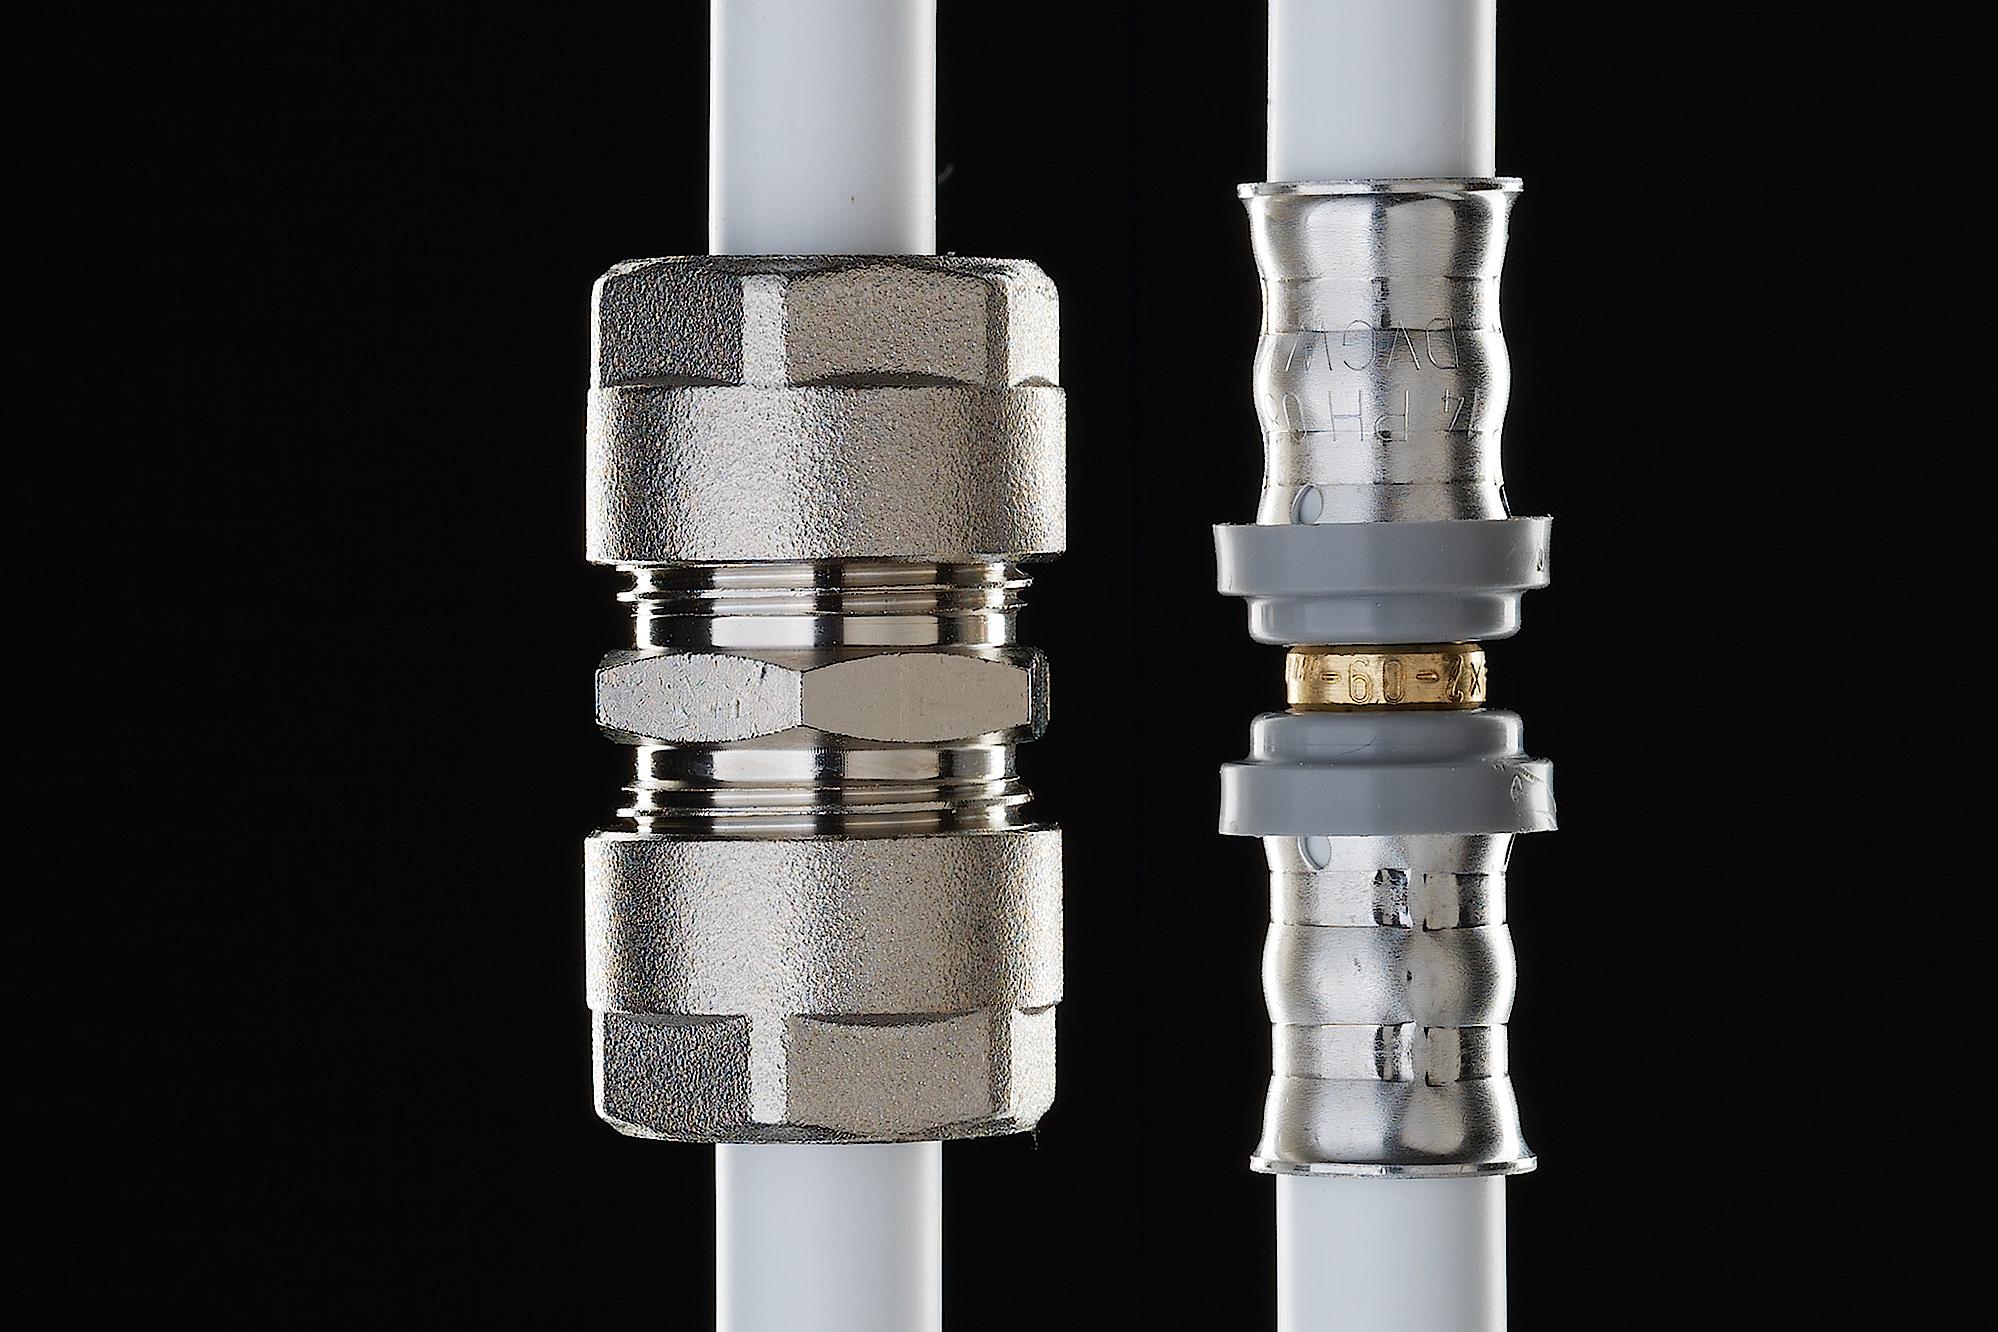 Kermi x-net 5-layer PE-Xc pipes and pipe connectors tested according to DIN 4726 and DIN EN ISO 15875.